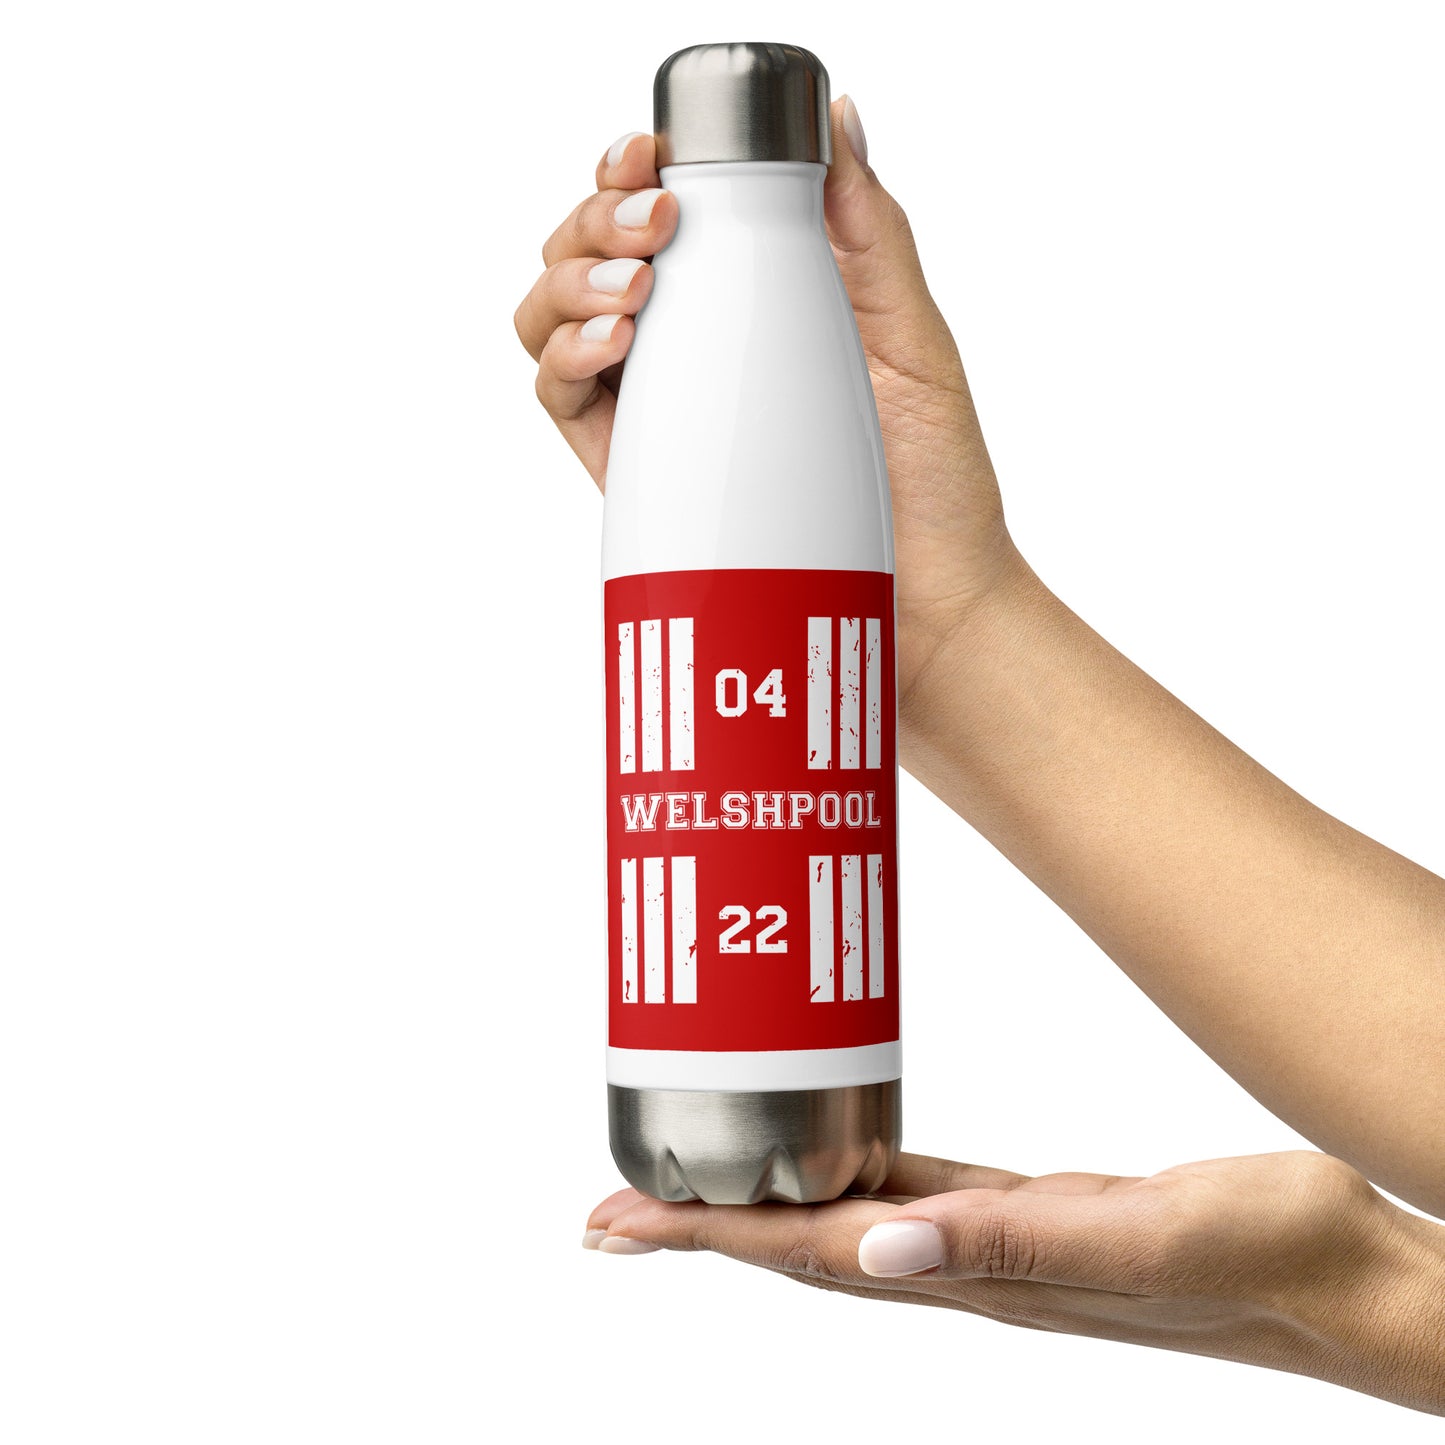 The Welshpool Airport runway designator water bottle features a red print with the airport's name and designator framed by stylised threshold markings showing through.